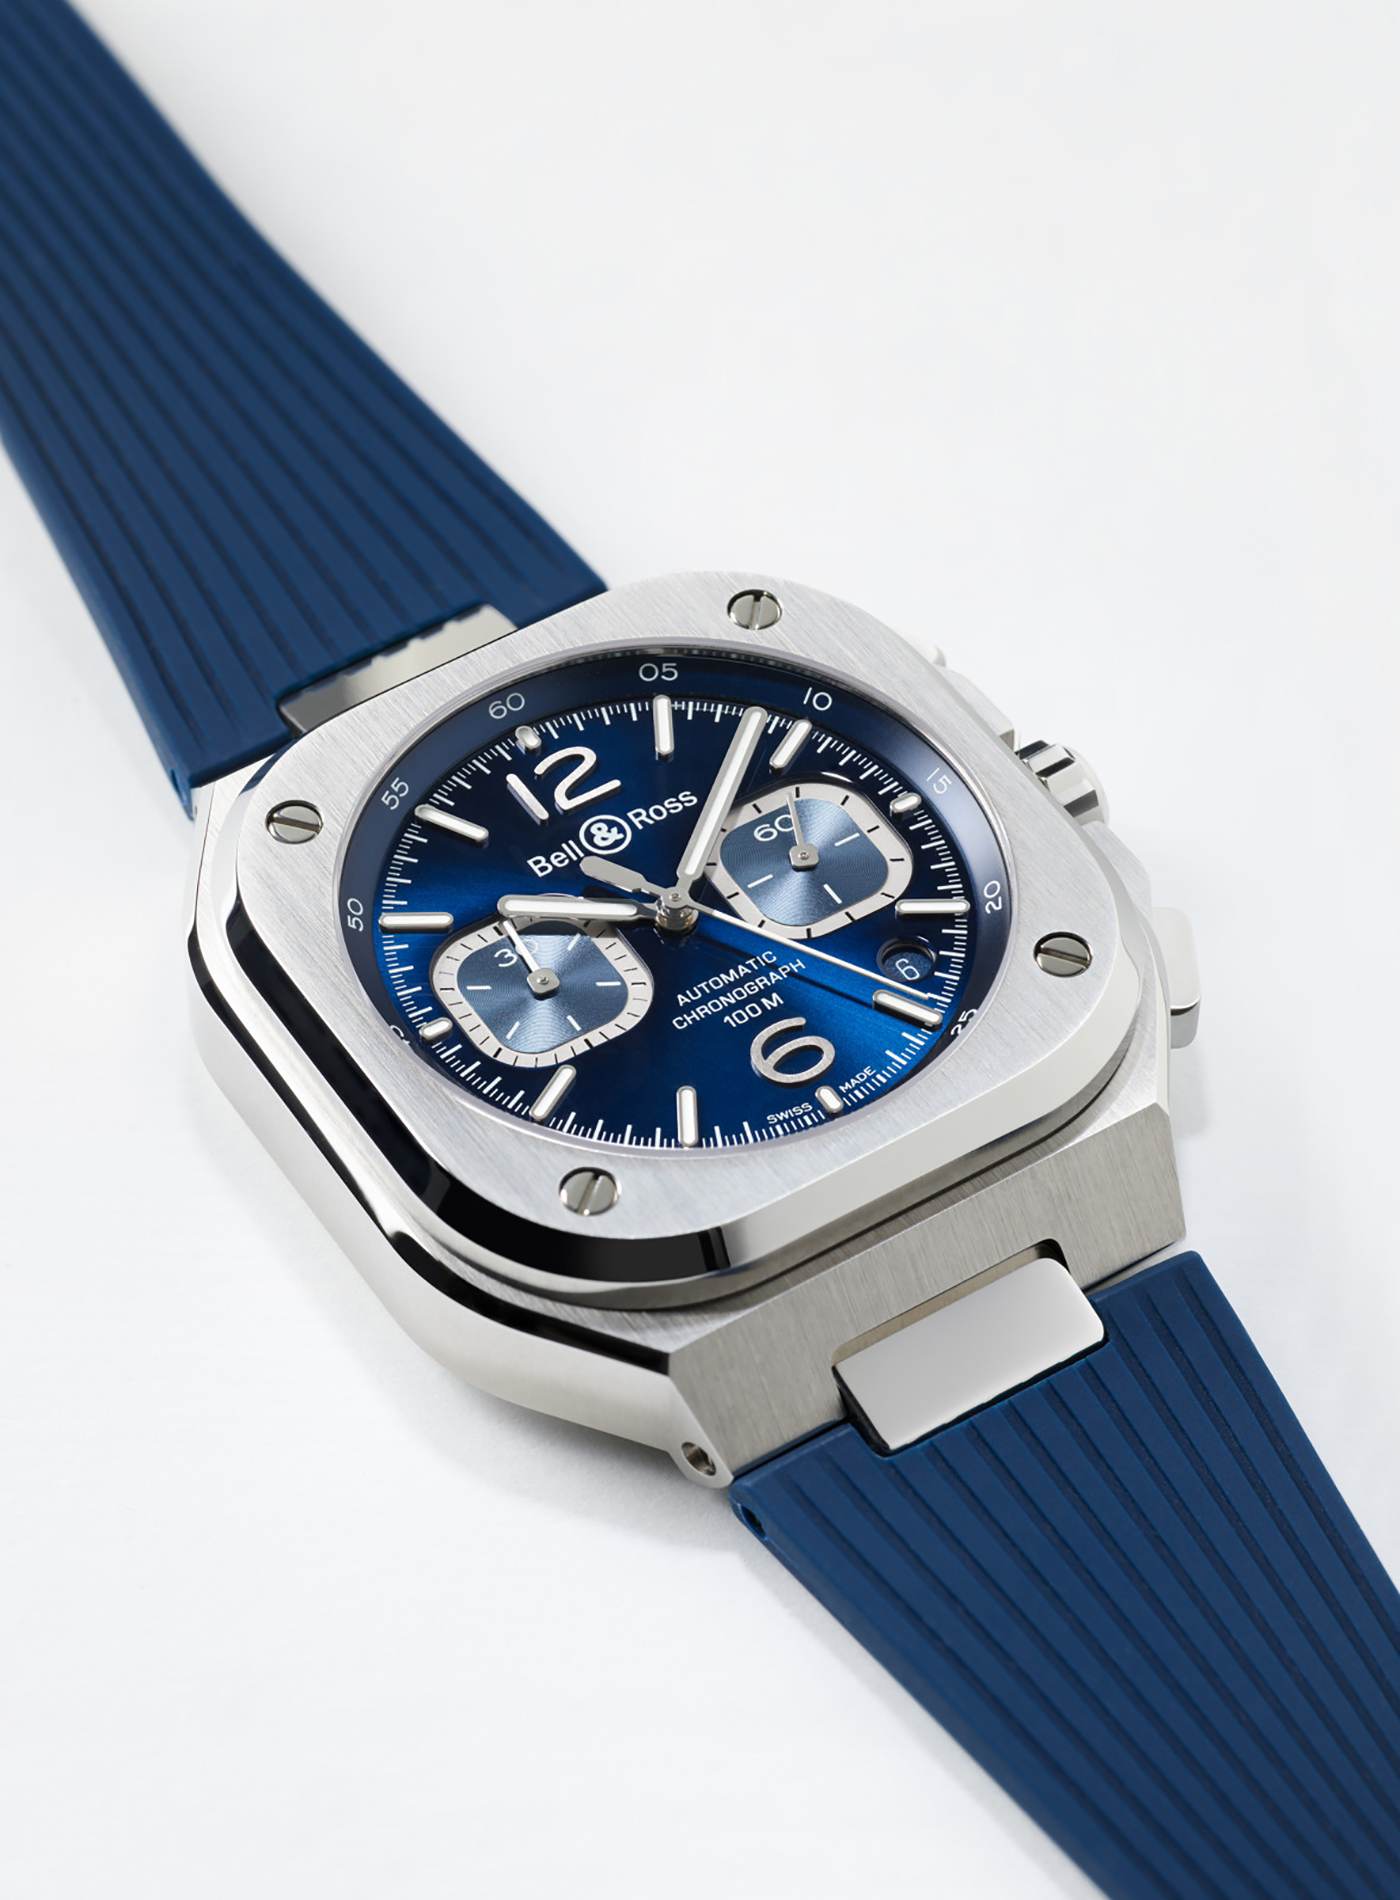 Bell & Ross Debuts BR 05 Chrono Watch Series Watch Releases 